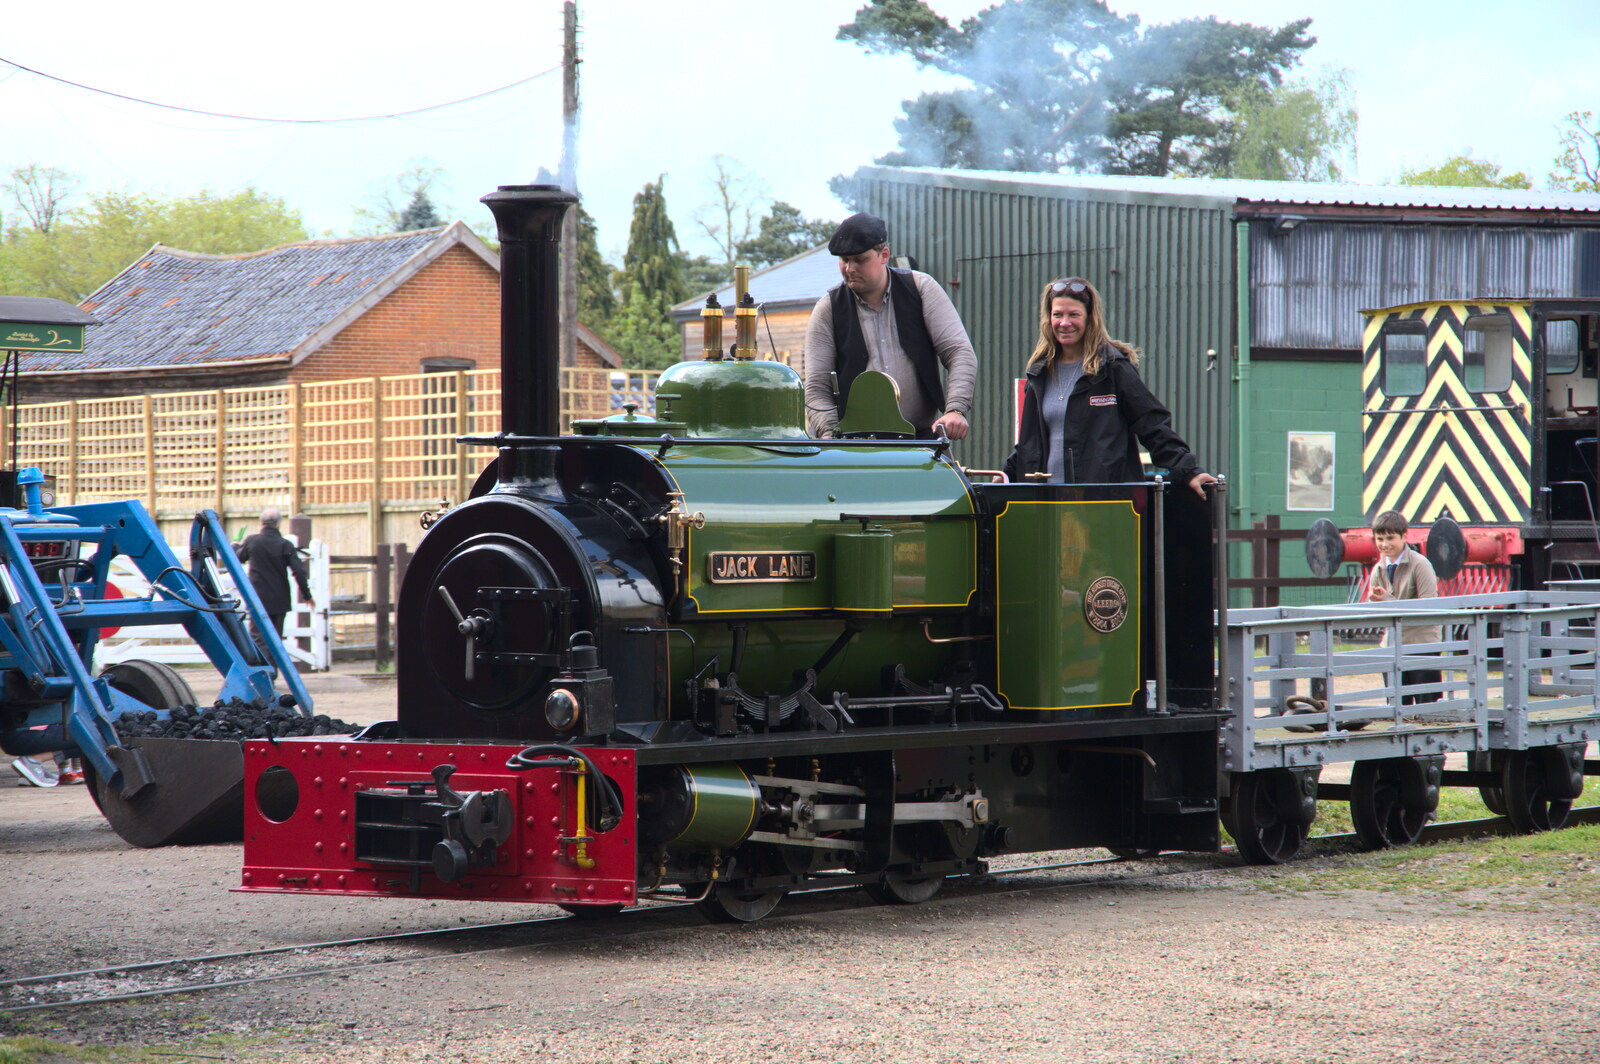 The shiny Jack Lane, built in 2006 from The Heritage Steam Gala, Bressingham Steam Museum, Norfolk - 1st May 2023